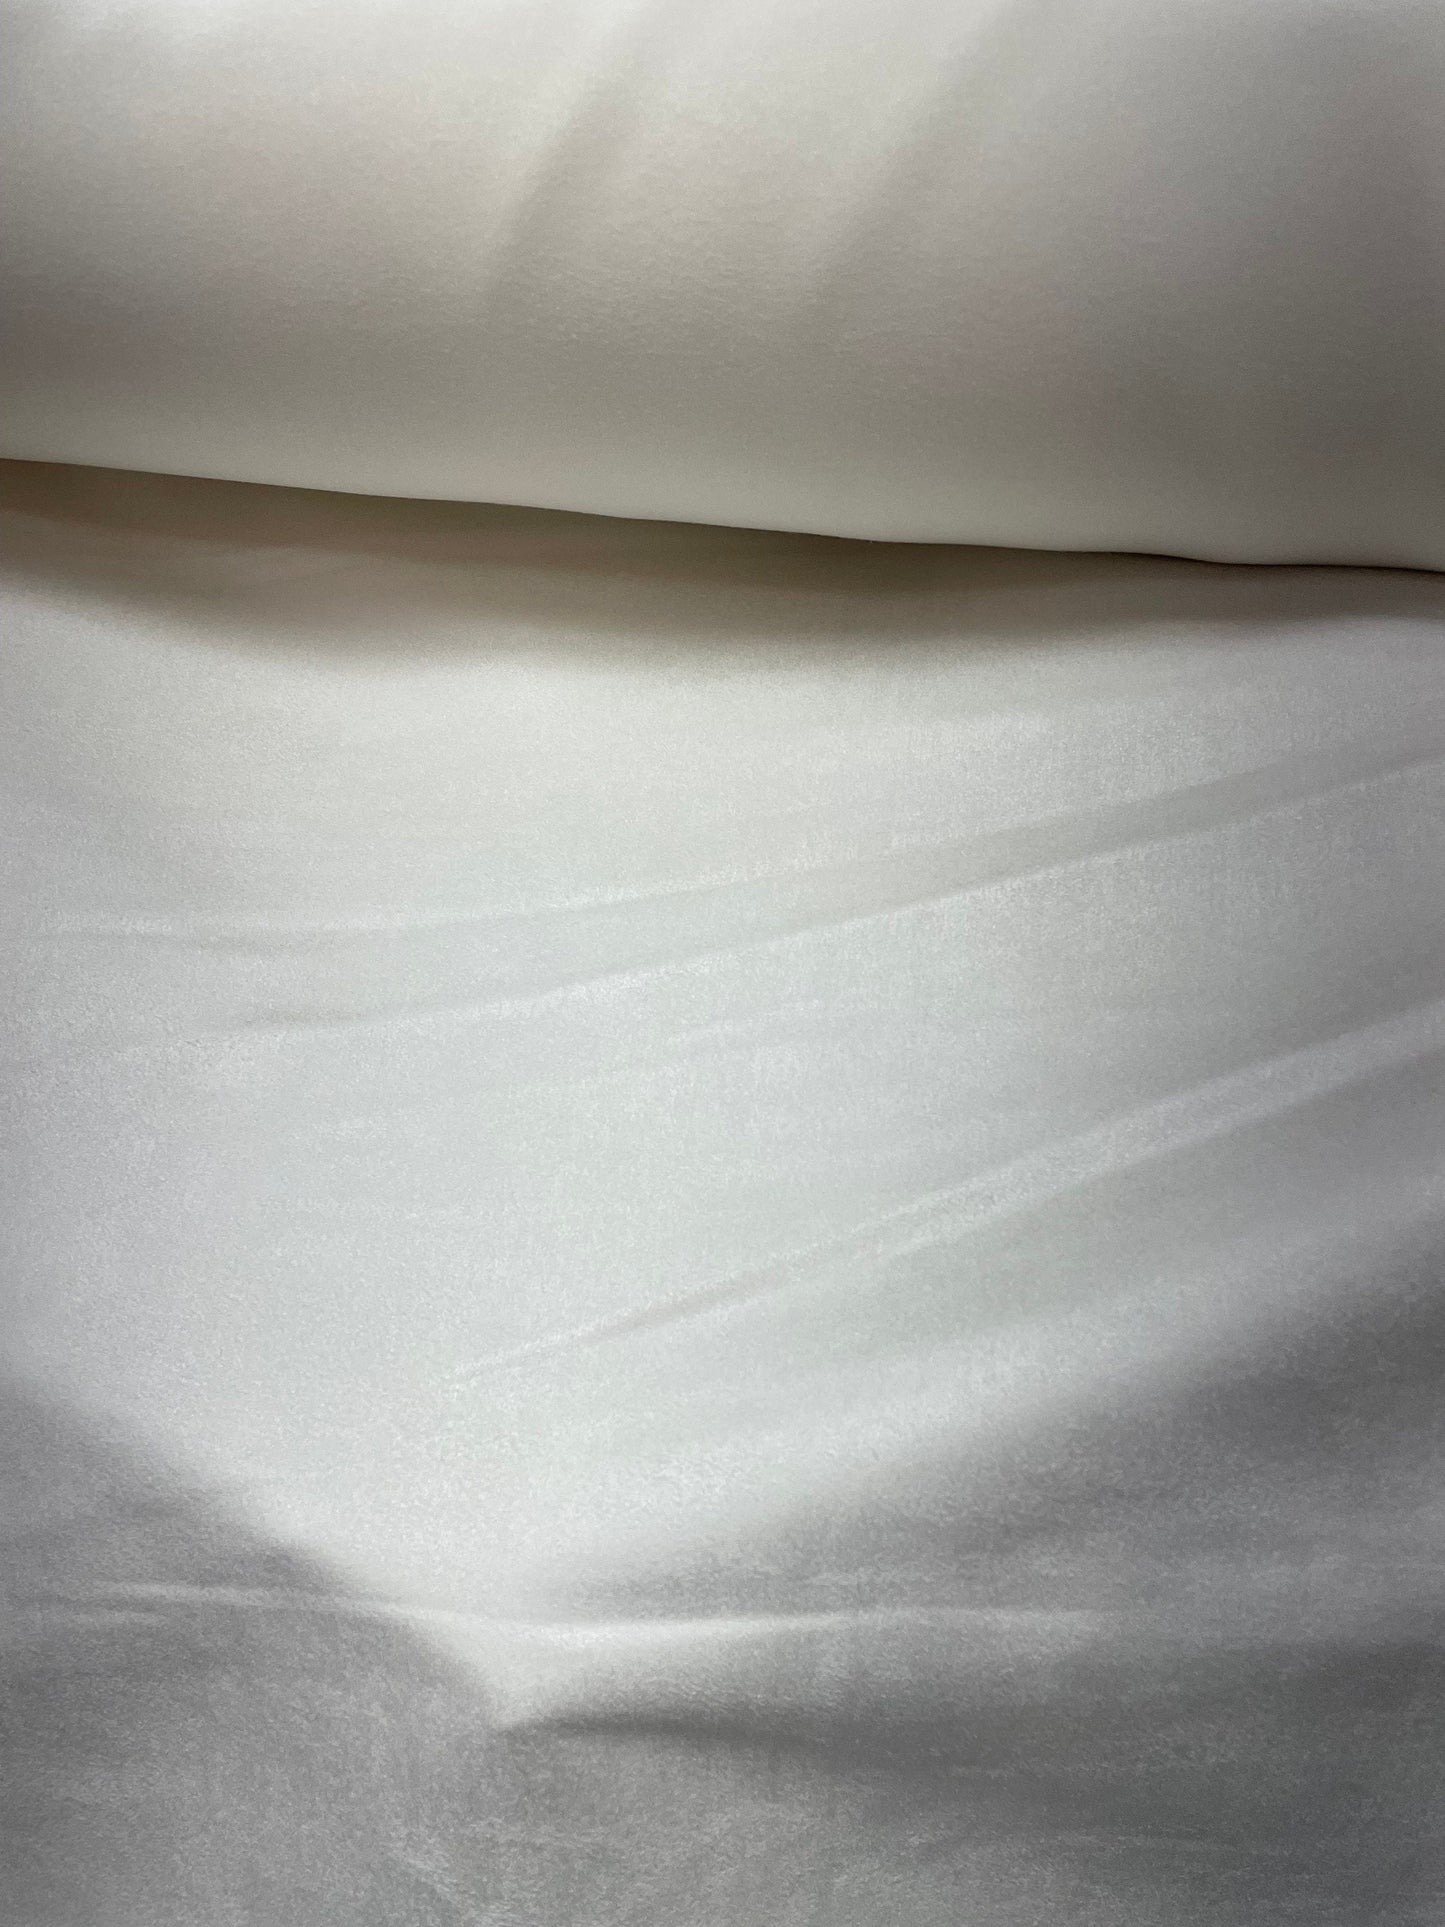 MILK WHITE Upholstery Suede Micro Faux Polyester Drapery Fabric (56 in.) Sold By The Yard